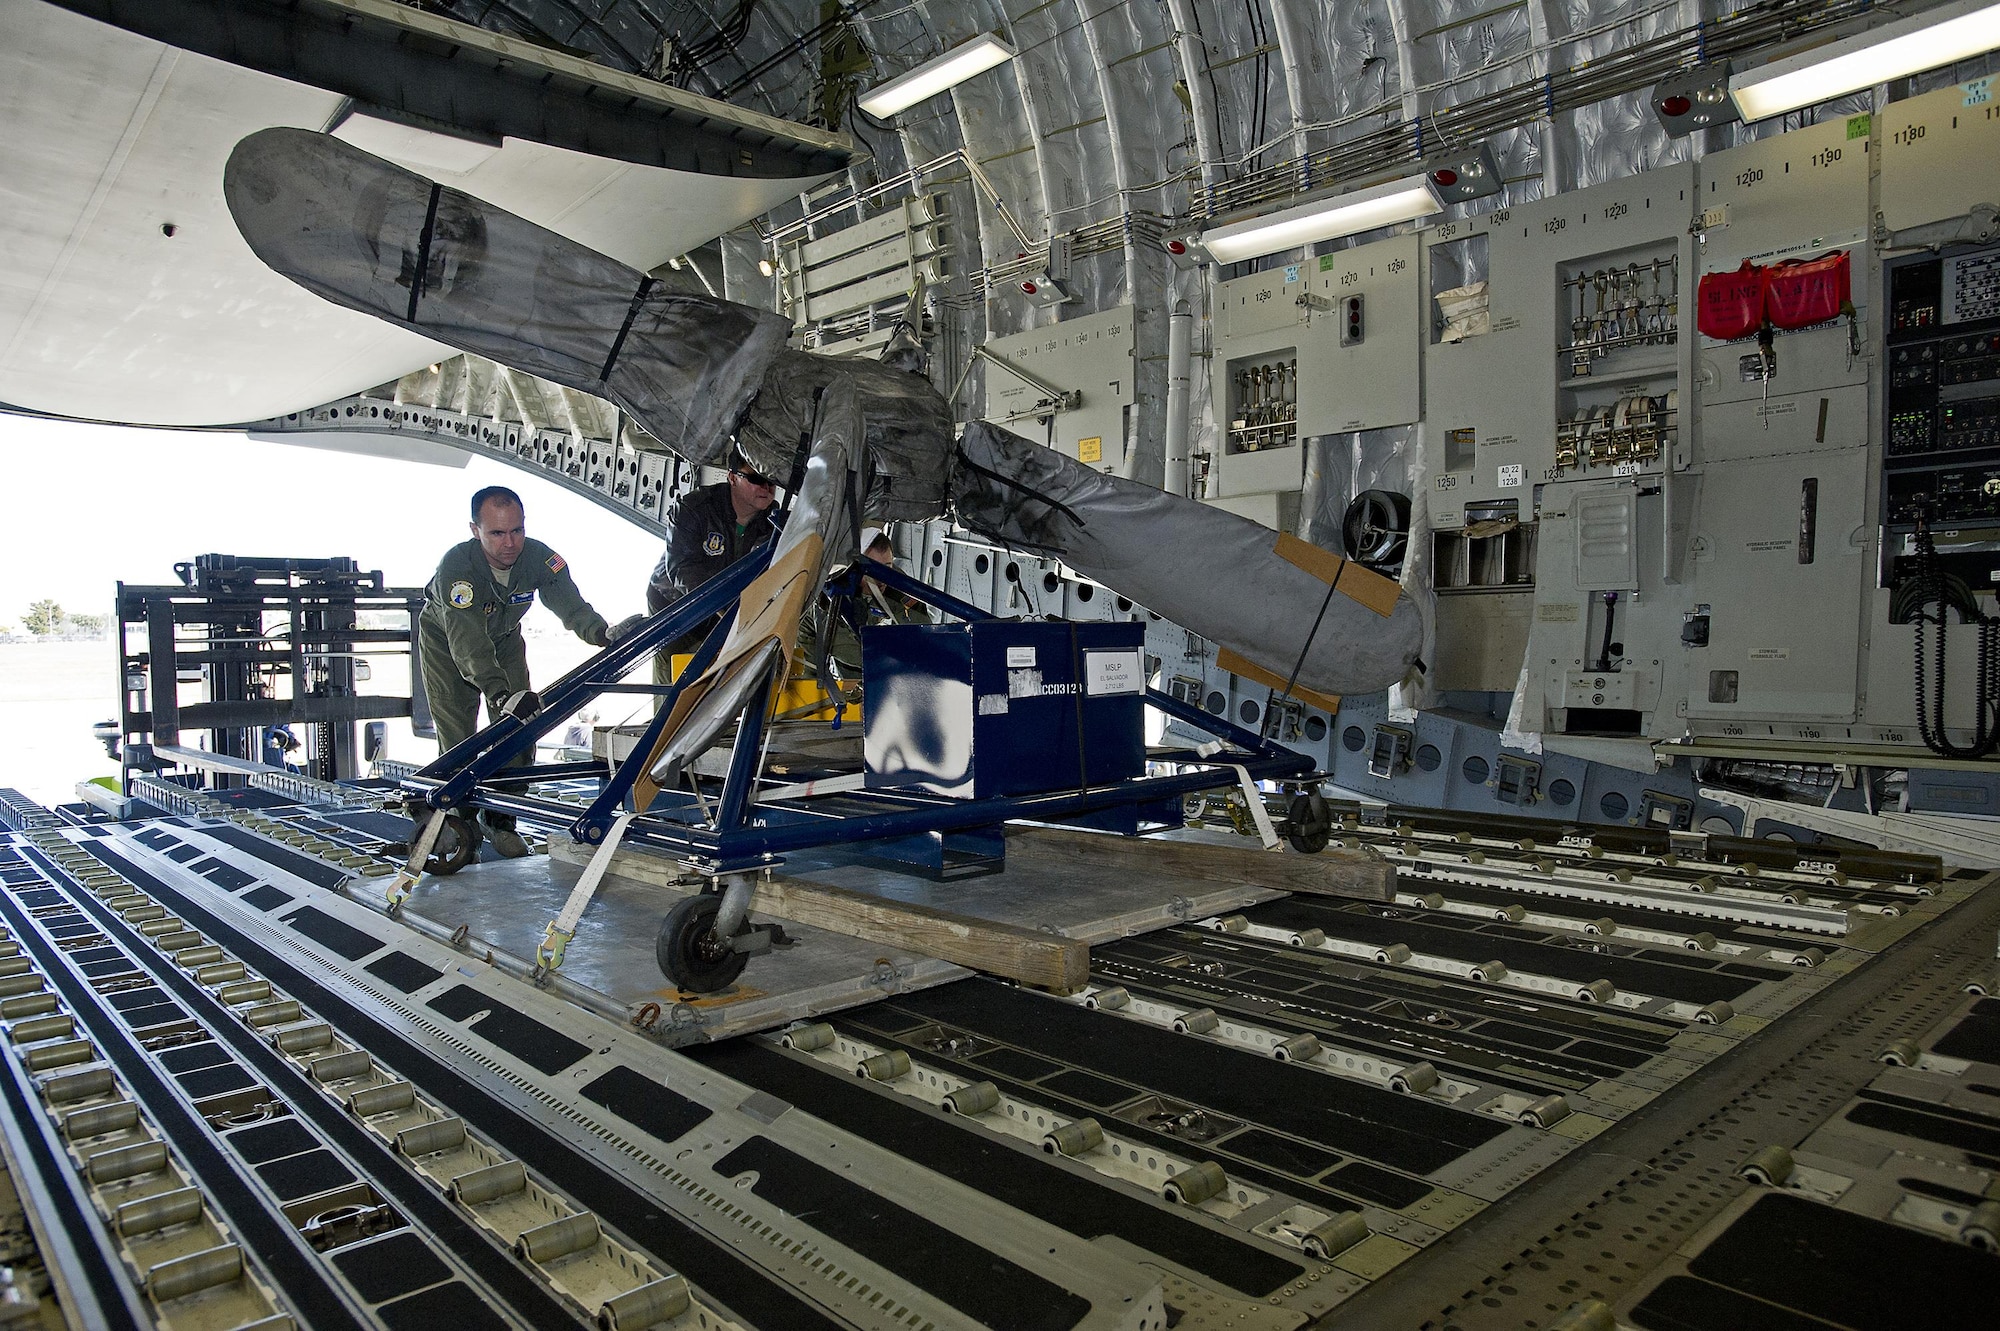 Tech. Sgt. Michael Smith, a loadmaster assigned to the 300th Airlift Squadron, Joint Base Charleston, South Carolina, pushes an aircraft propellar into the cargo area of a C-17 Globemaster III aircraft. Reservists assigned to the 300 AS assisted the U.S. Coast Guard with transporting several MH-65 Dolphin helicopters and various supplies Feb. 5-7, 2016. (U.S. Air Force photo by SSgt. Bobby Pilch)